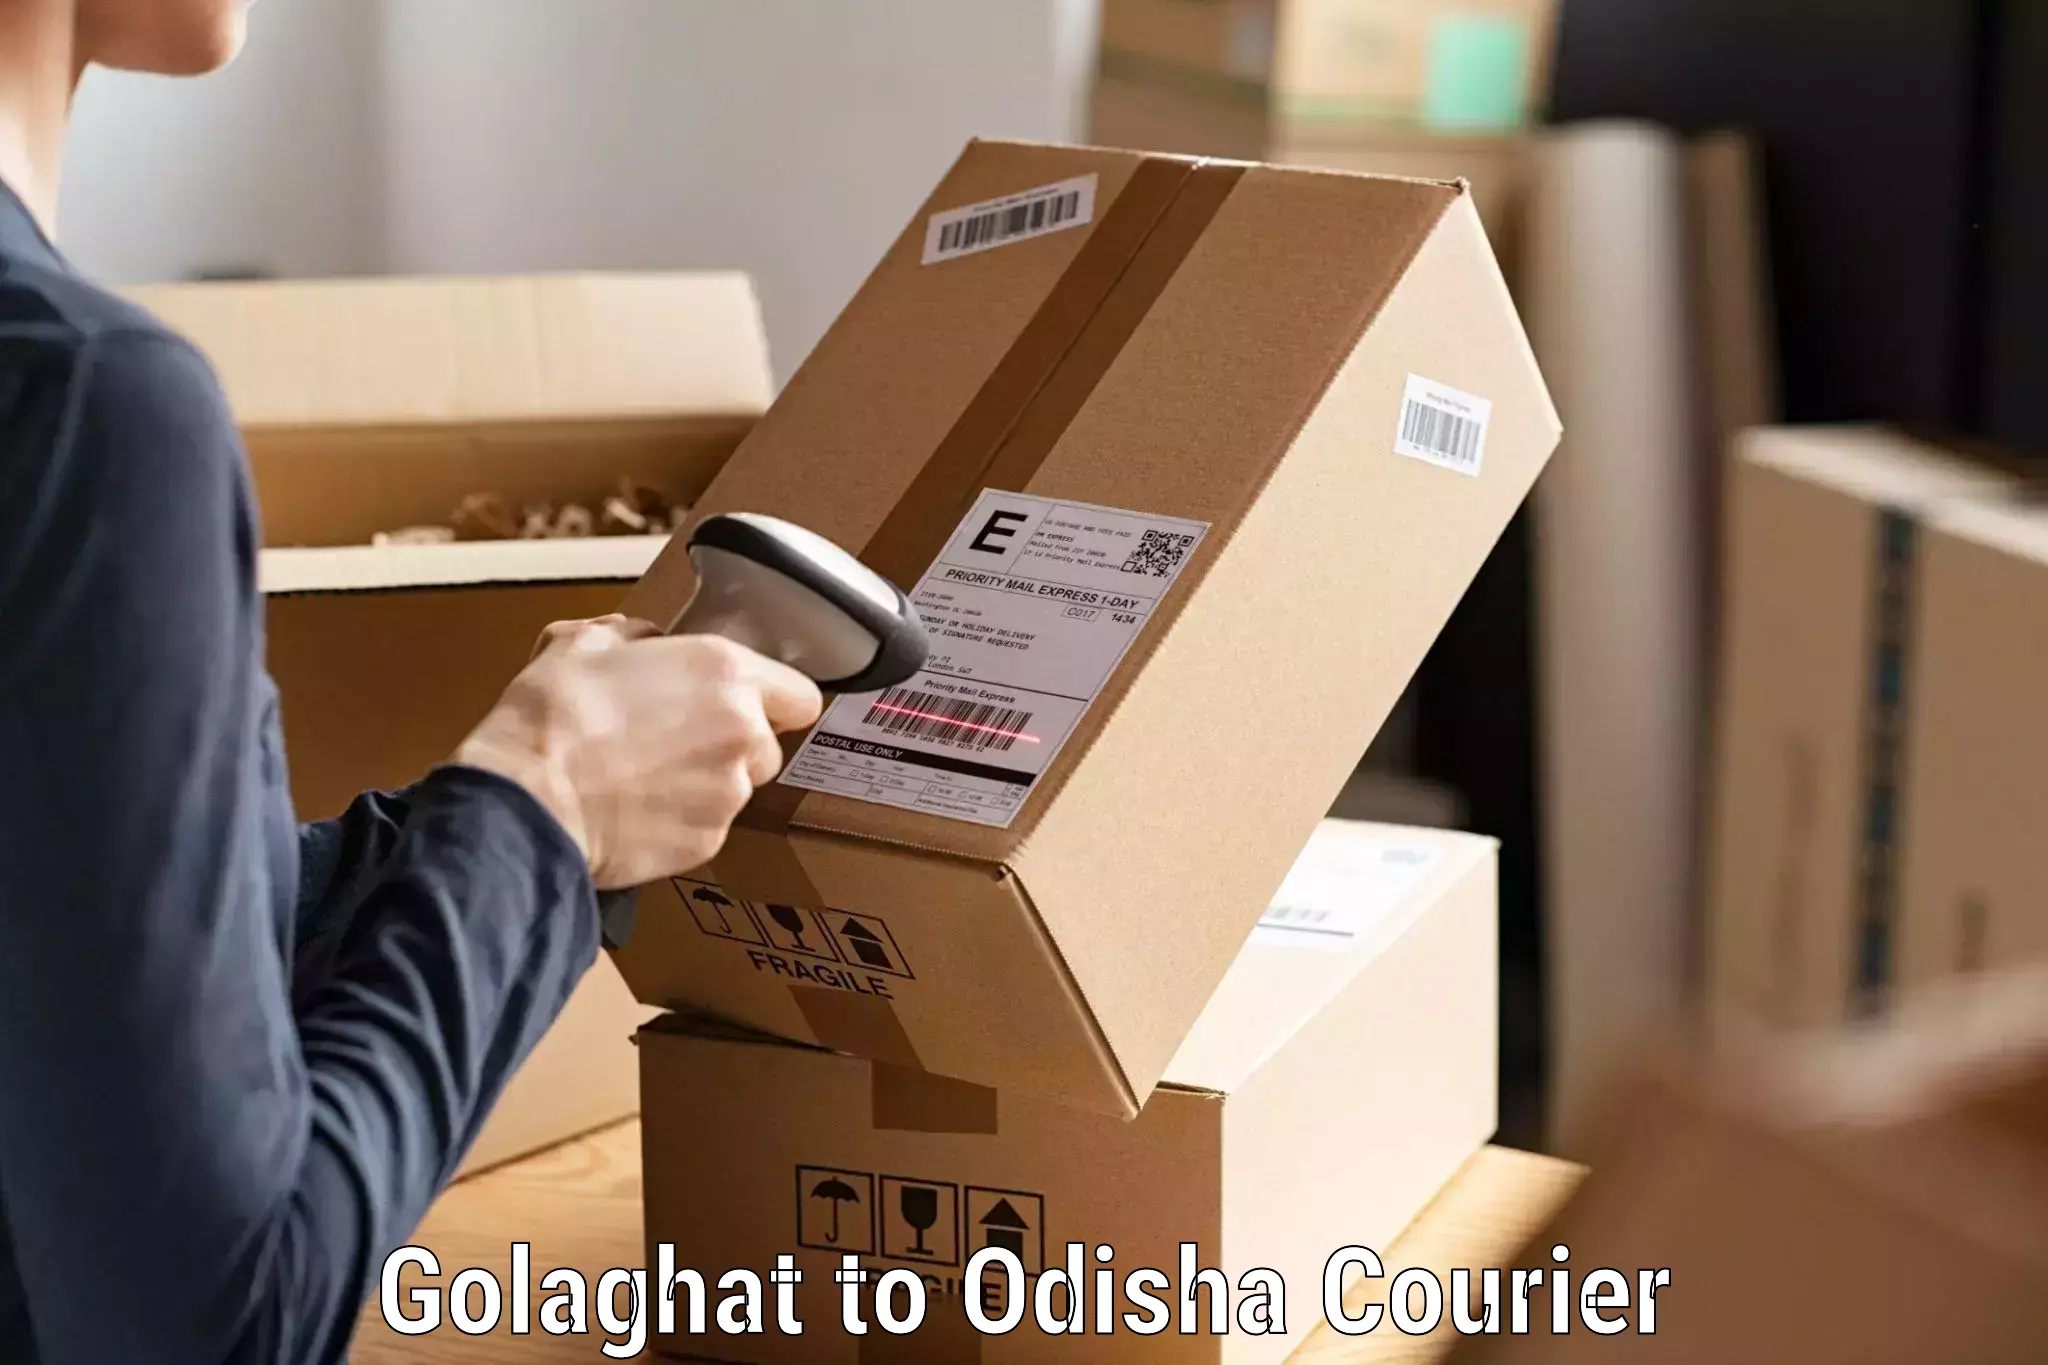 Round-the-clock parcel delivery Golaghat to Baripada